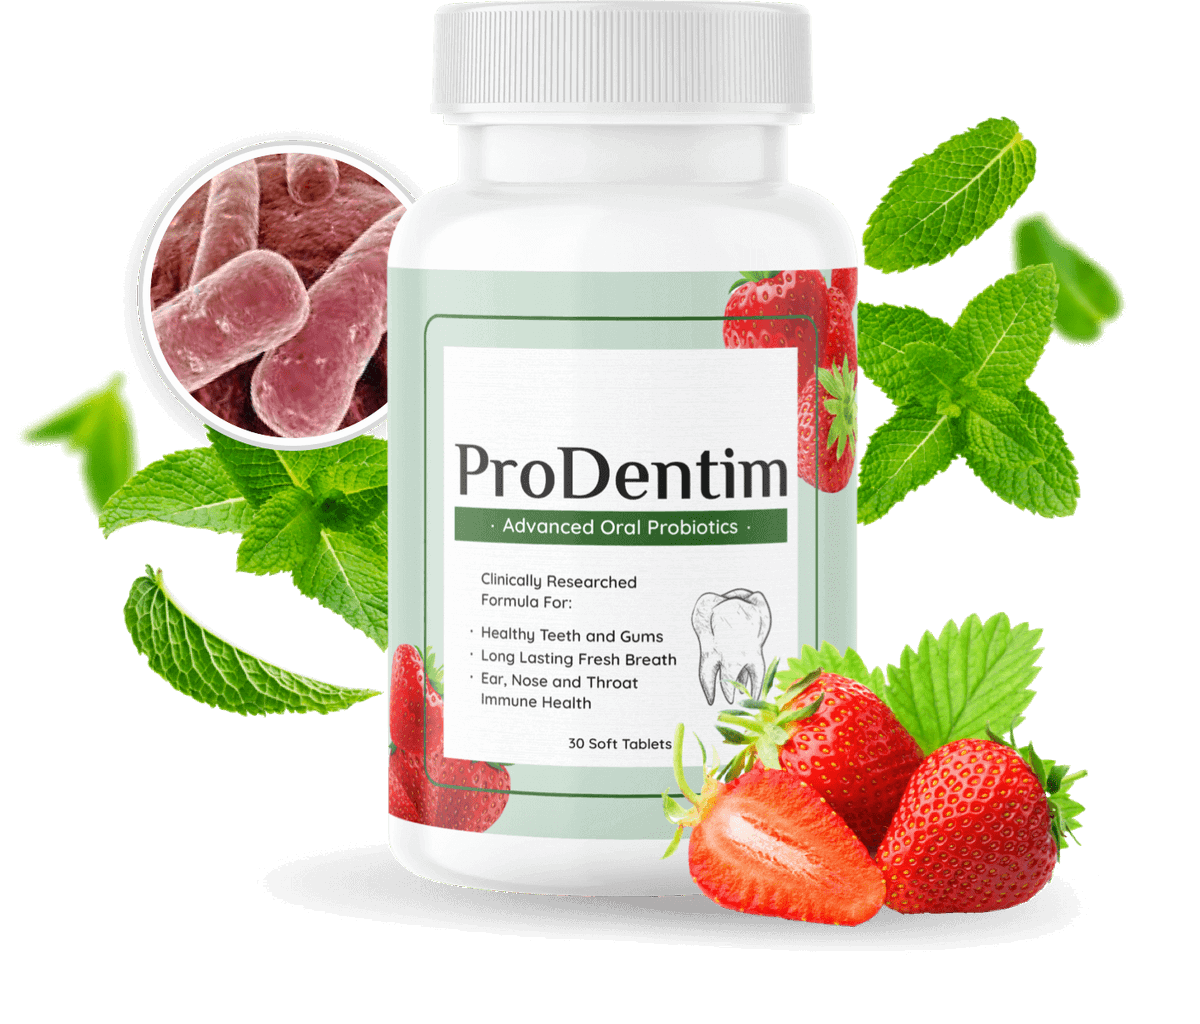 Brand New Probiotics
Specially Designed For The
Health Of Your Teeth And Gums
Try ProDentim: a unique blend of 3.5 billion probiotic strains and nutrients backed by clinical research.